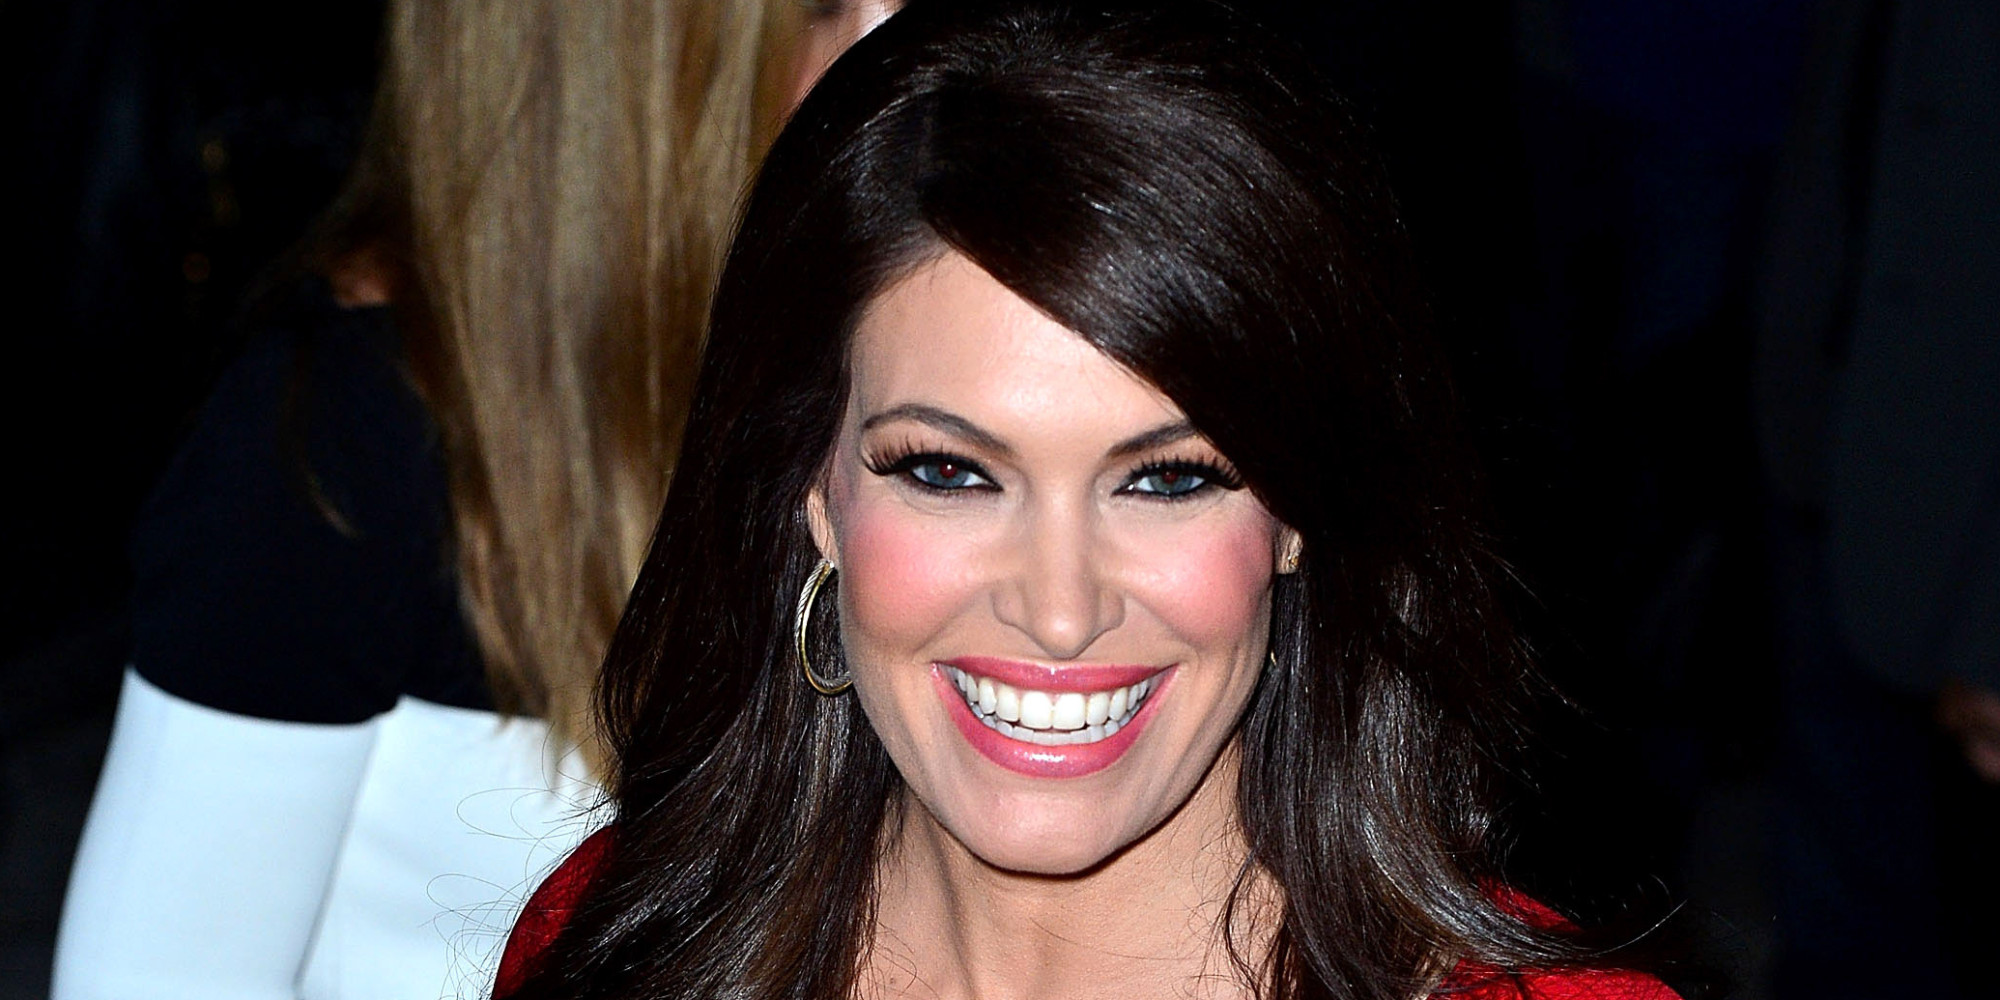 Why I'm Ignoring Kimberly Guilfoyle (And You Should Too) HuffPost.